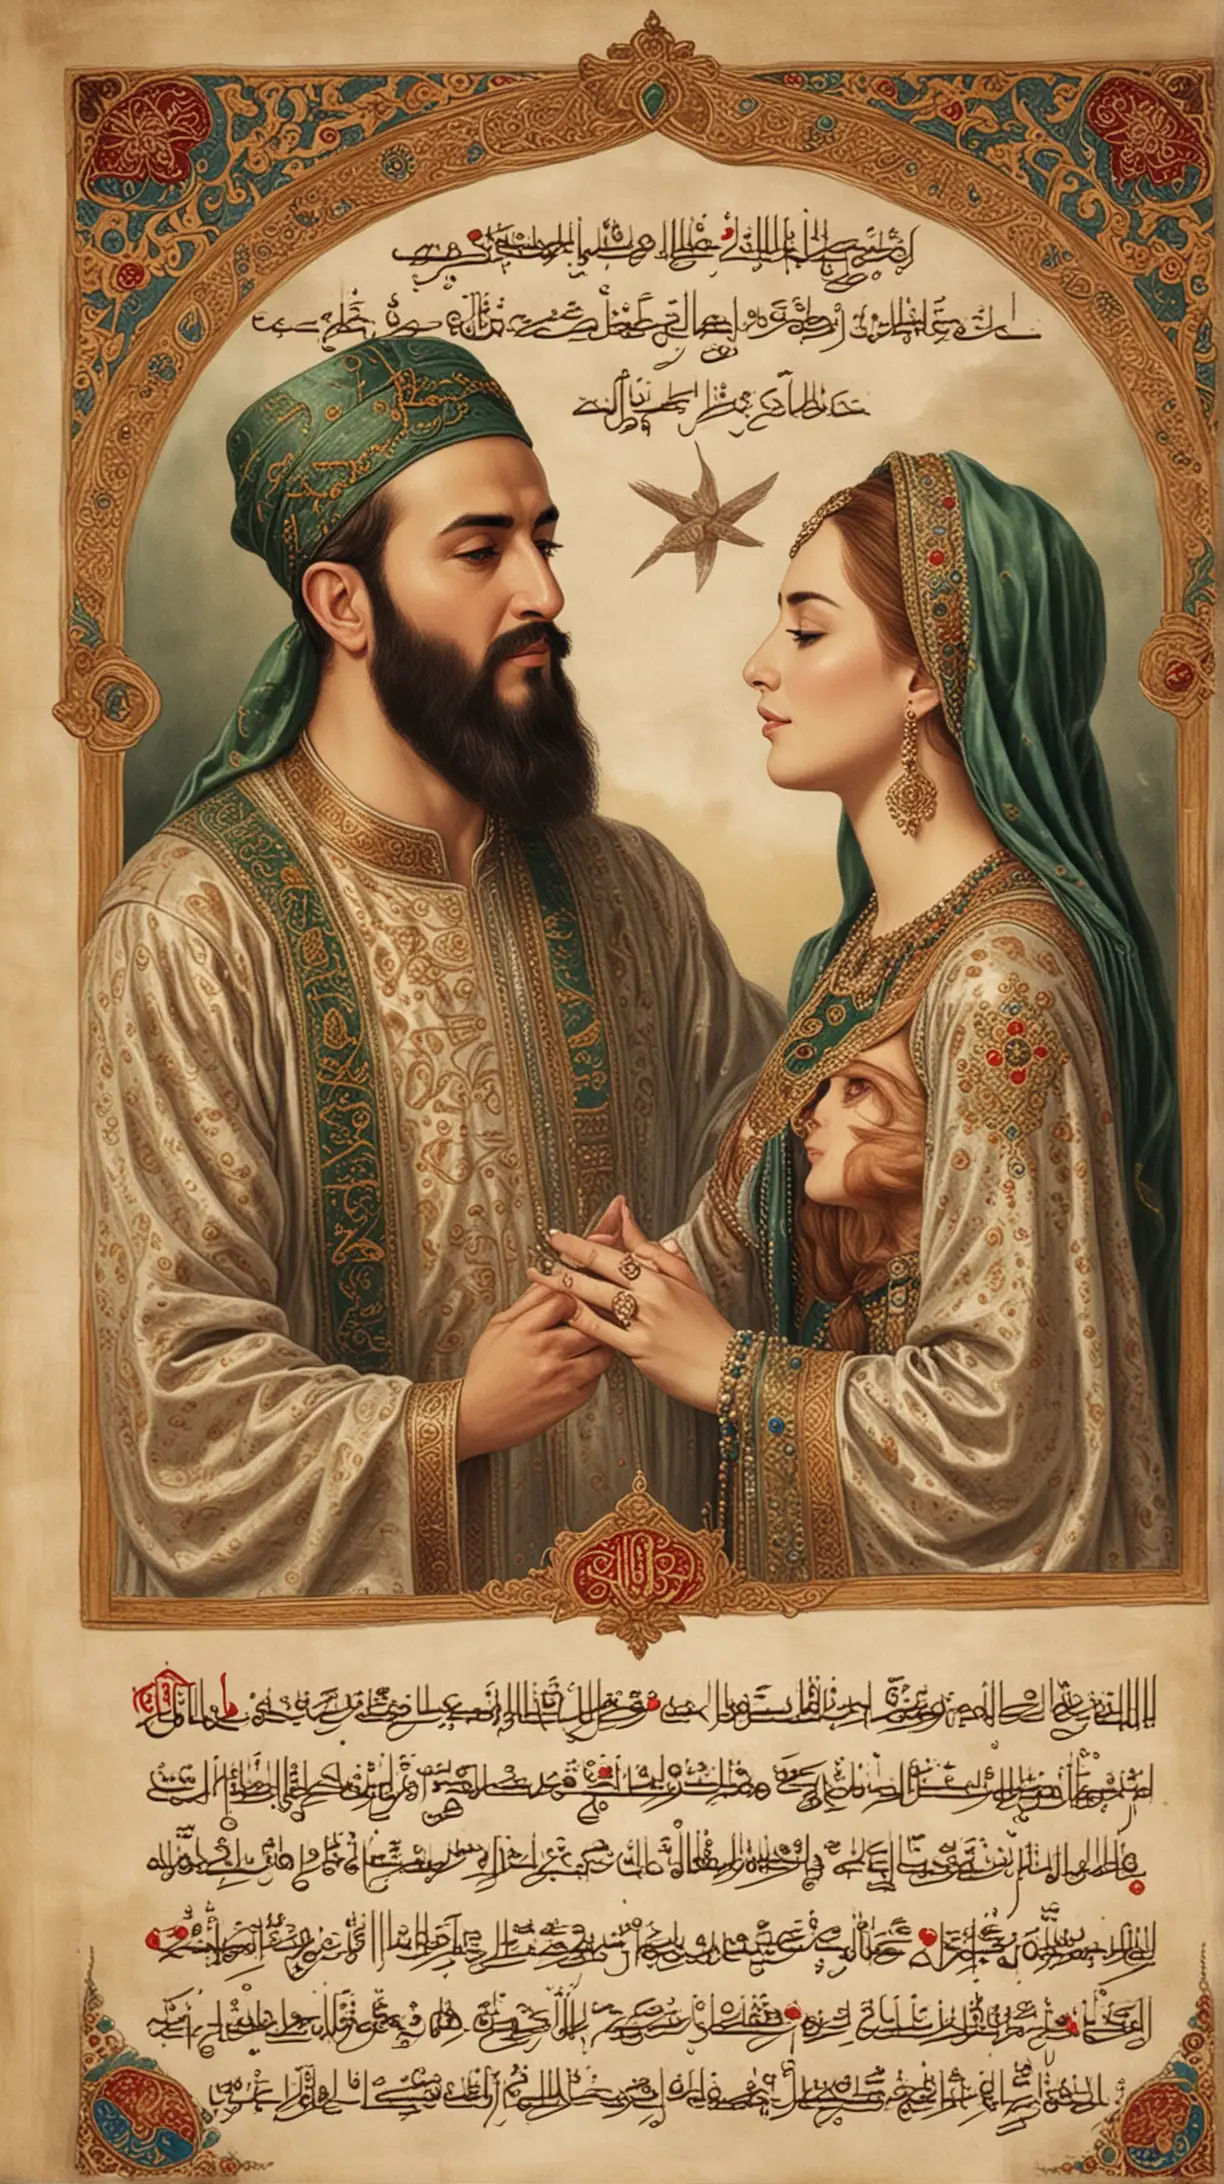 An image showcasing Suleiman reciting poetry to Hurrem, with the words of his verses floating in the air around them, symbolizing the depth of their emotional connection.